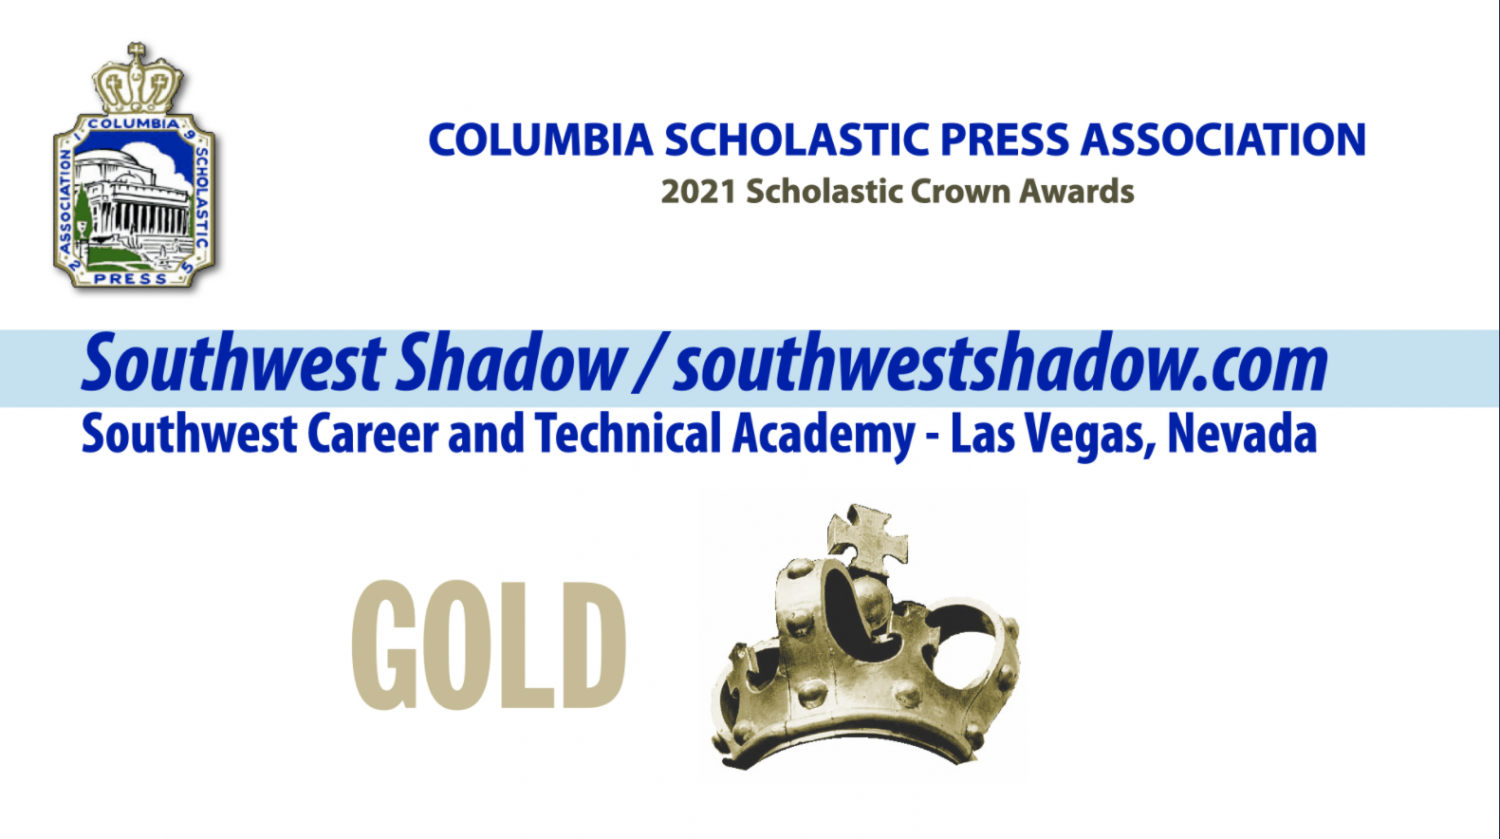 The Scholastic Crown Awards are known as some of the most prestigious honors for student journalism groups. Photo Credit: Columbia Scholastic Press Association